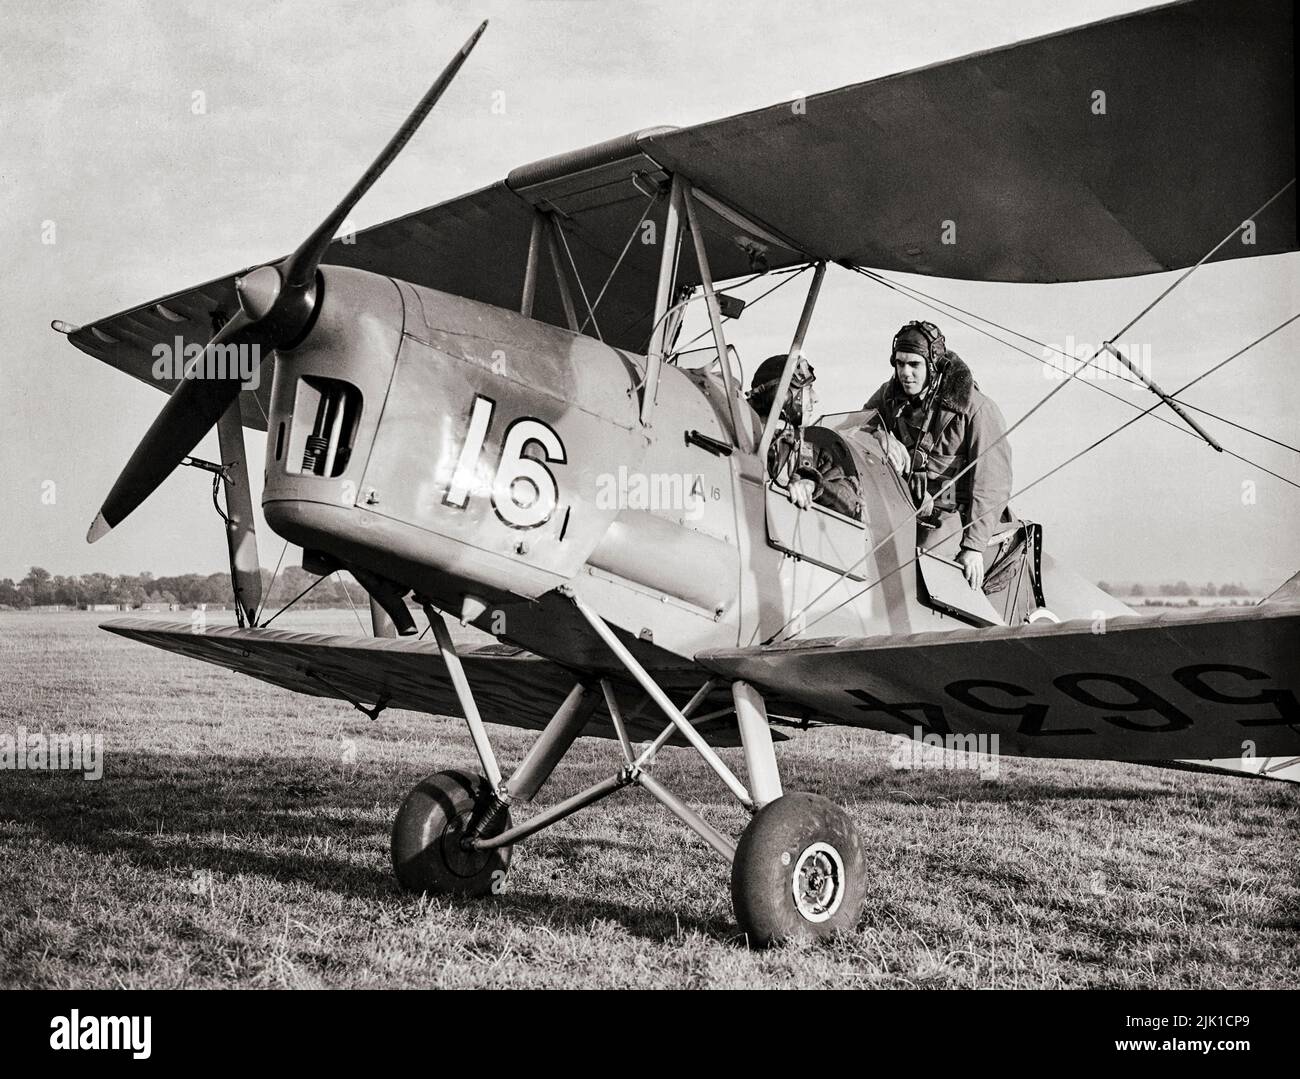 A trainee pilot and his instructor (in the front cockpit) preparing for a flight in a de Havilland Tiger Moth at an Elementary Flying Training School.The Tiger Moth was a 1930s British biplane designed by Geoffrey de Havilland and built by the de Havilland Aircraft Company. It was operated by the Royal Air Force (RAF) and other operators as a primary trainer aircraft Stock Photo